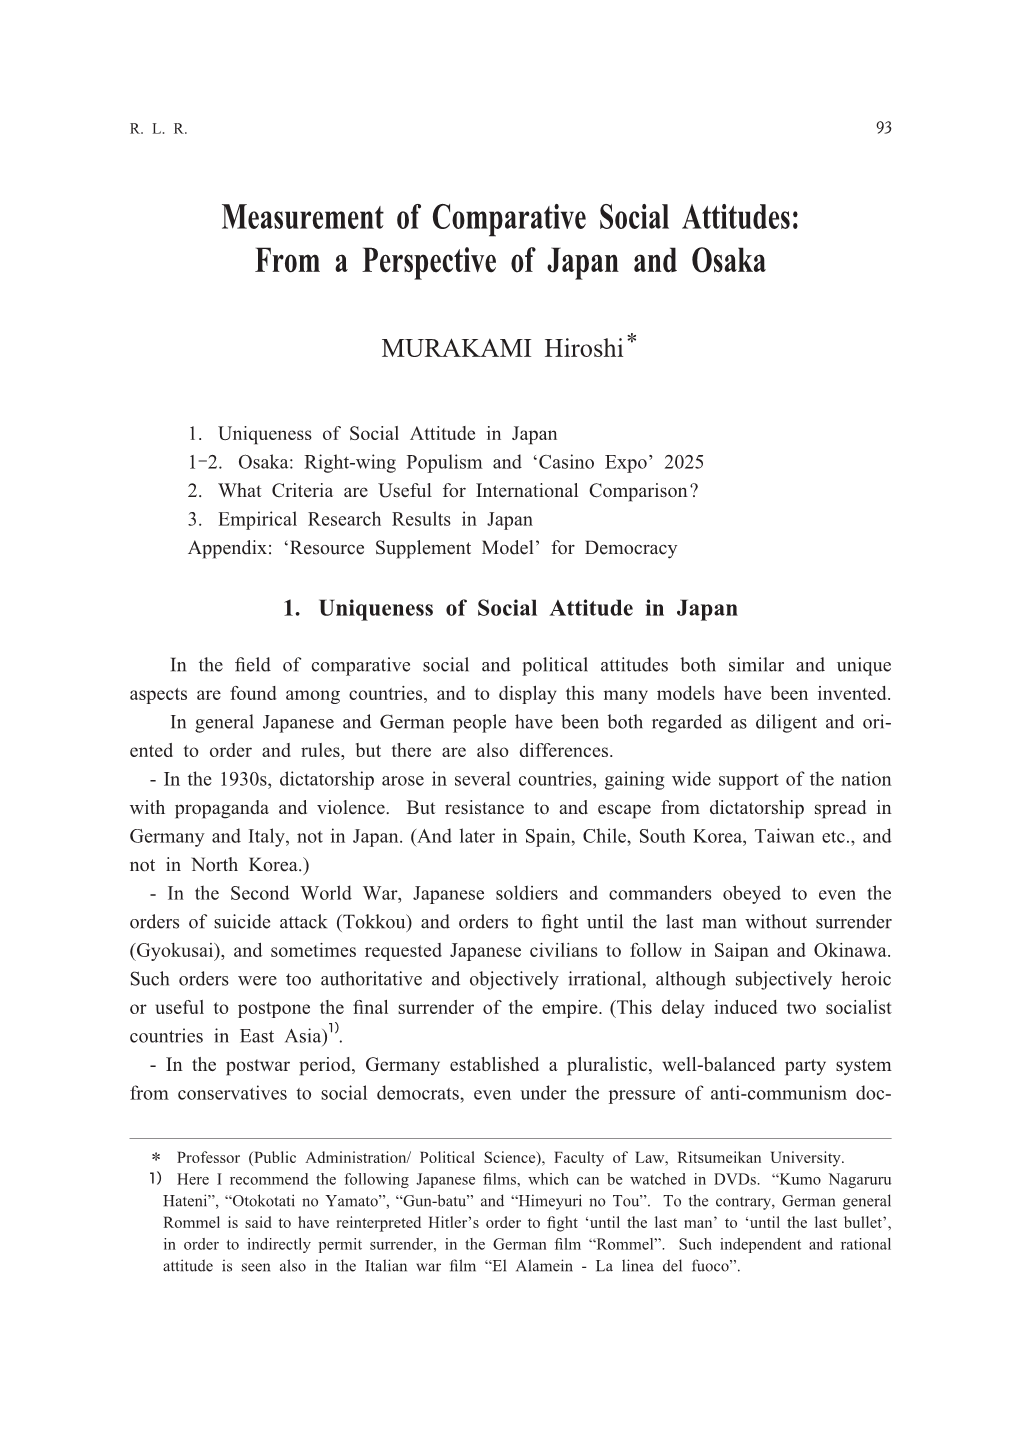 Measurement of Comparative Social Attitudes: from a Perspective of Japan and Osaka